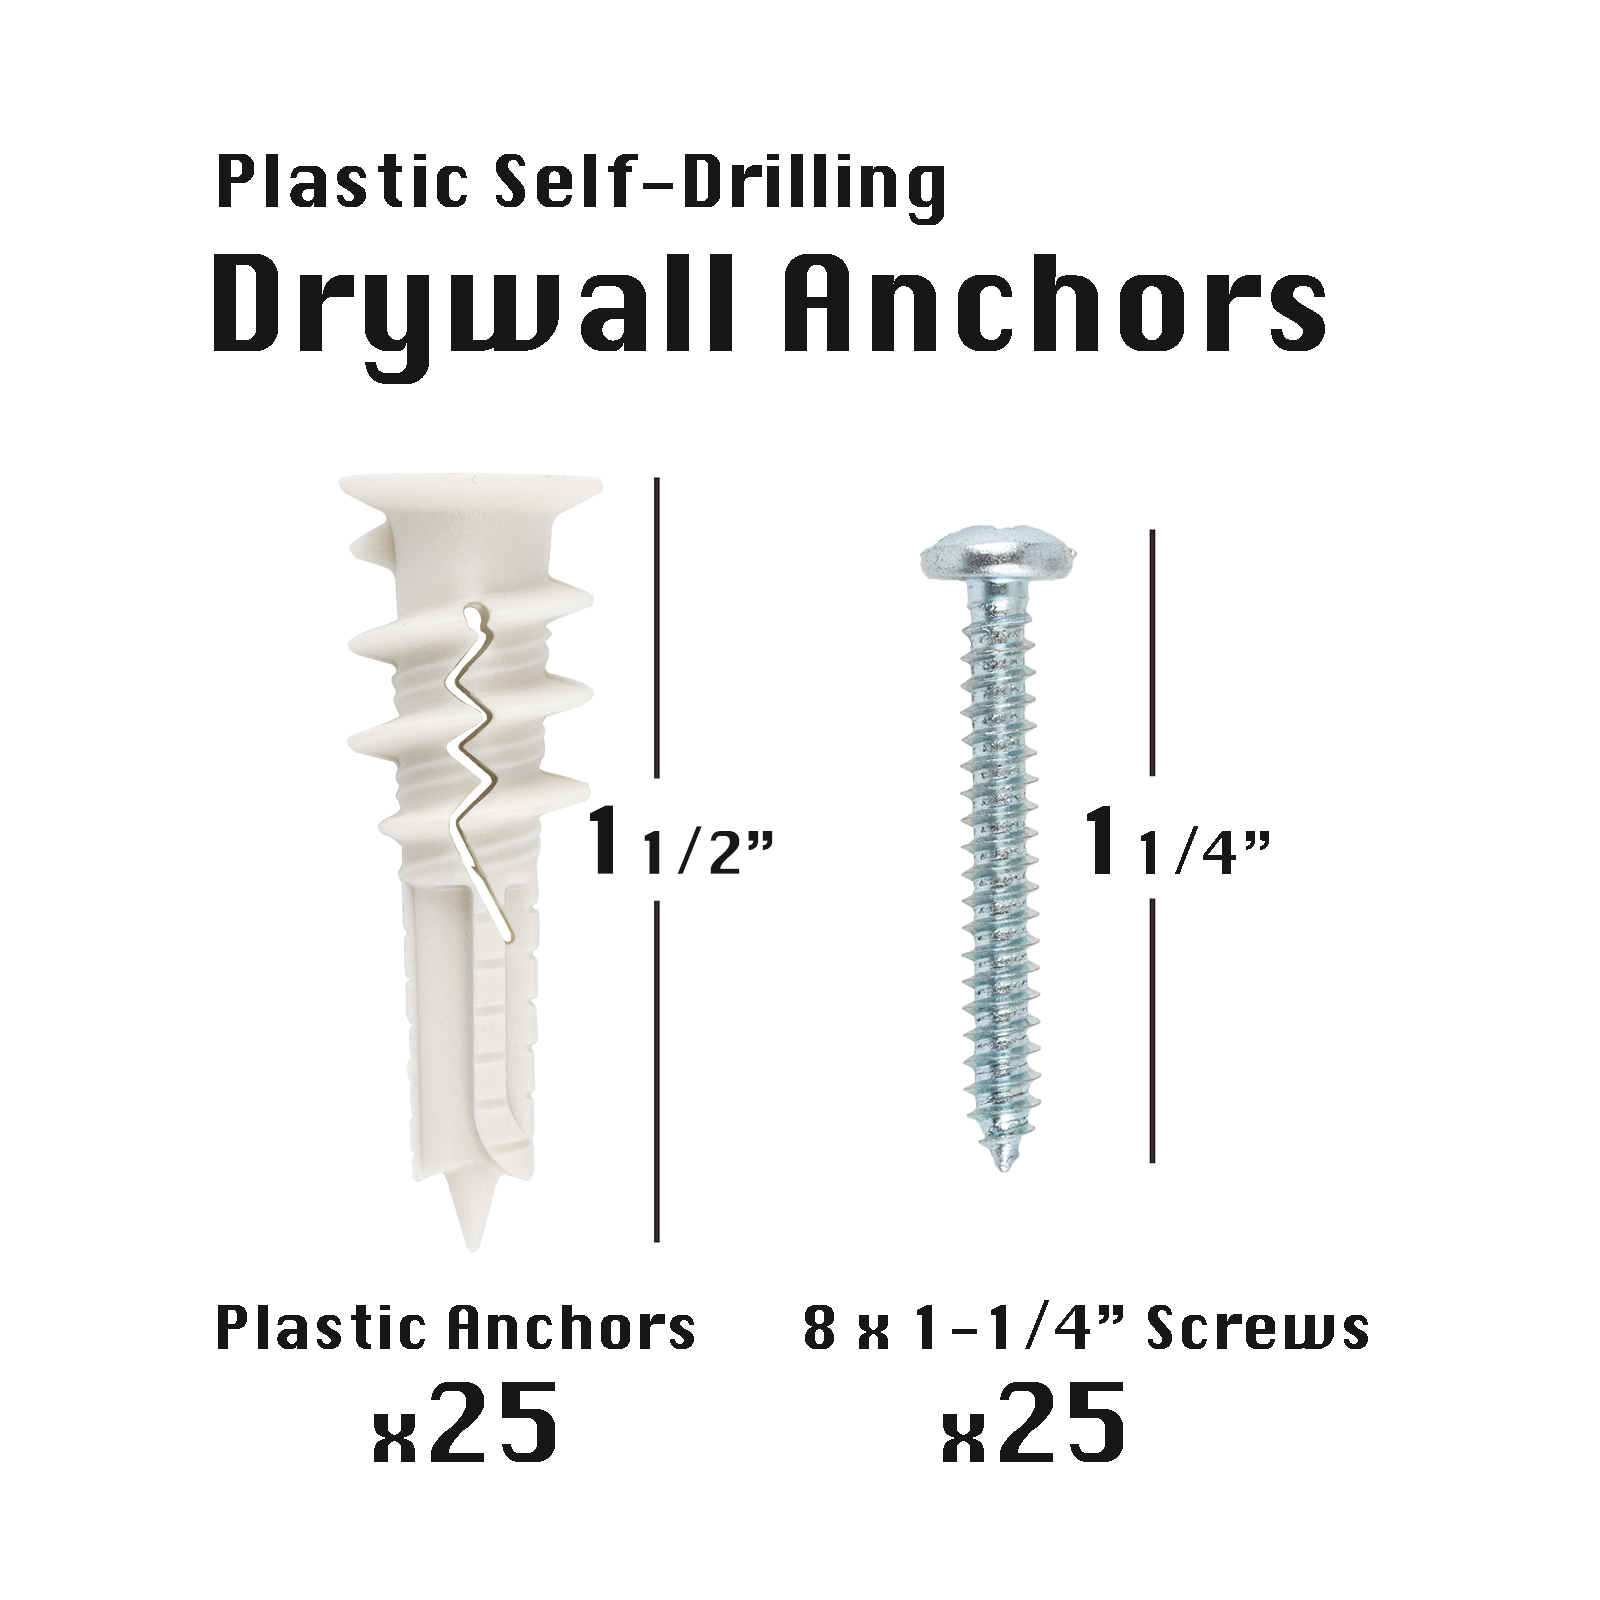 Shelf Straps 20PCS Self Drilling Anchors Screws Drywall Self-Drilling Anchors Expansion Set,Carbon Steel Hollow Wall Anchor Tapping Screw with Screws Kit,Suitable for Wall Insulation Board